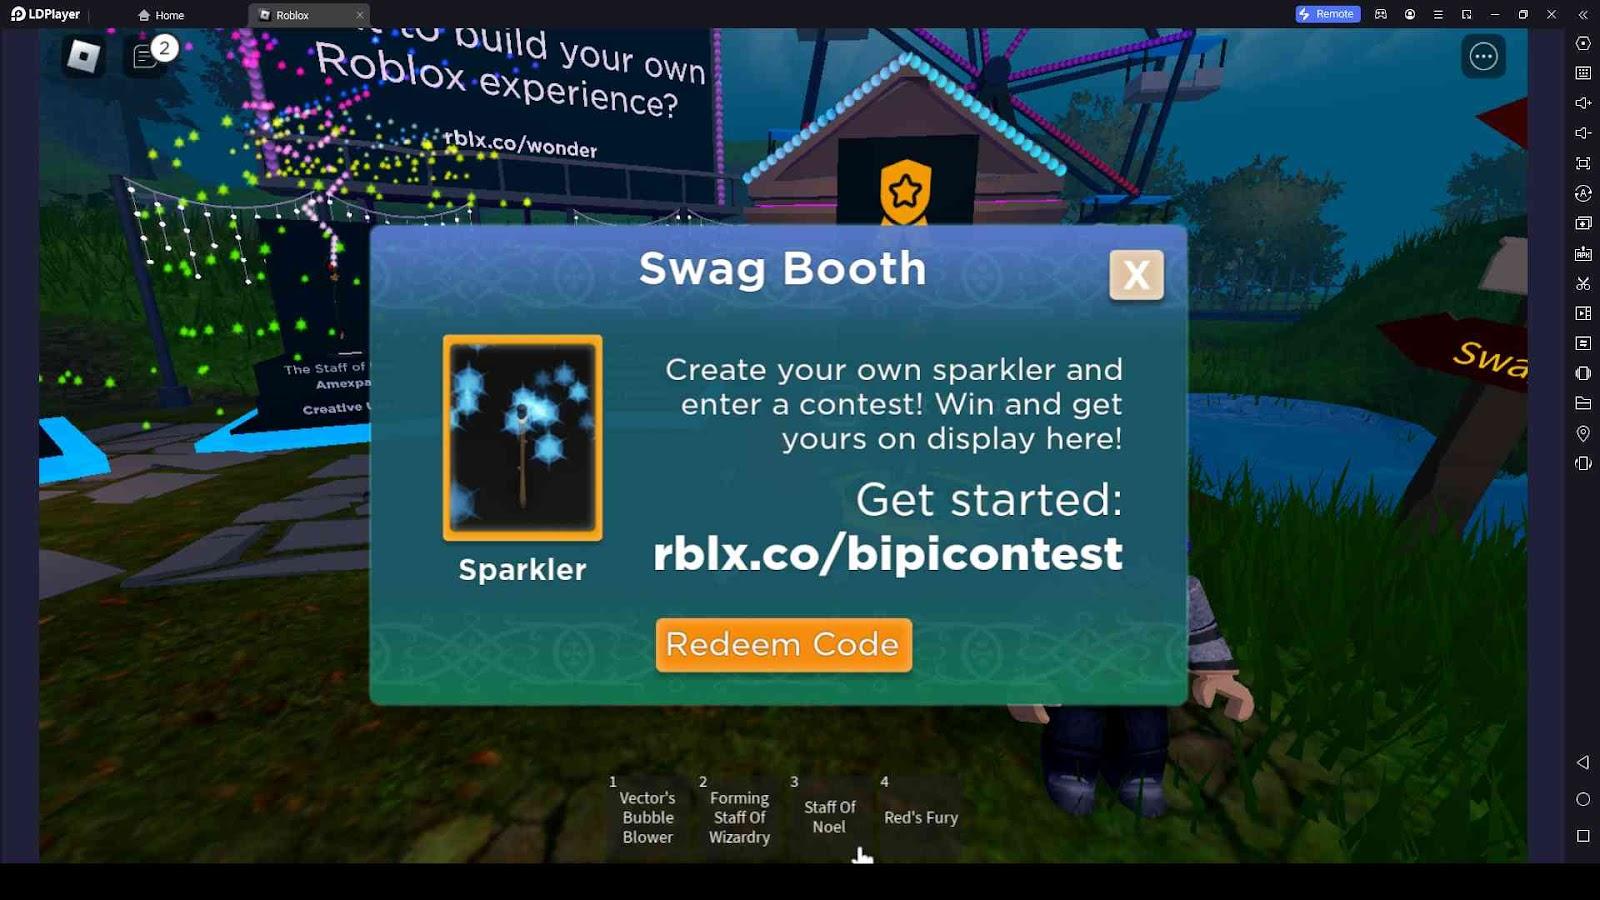 💬 CODES FOR 4 NEW FREE ITEMS FOR YOUR ROBLOX AVATAR! ROBLOX MANSION OF  WONDER!